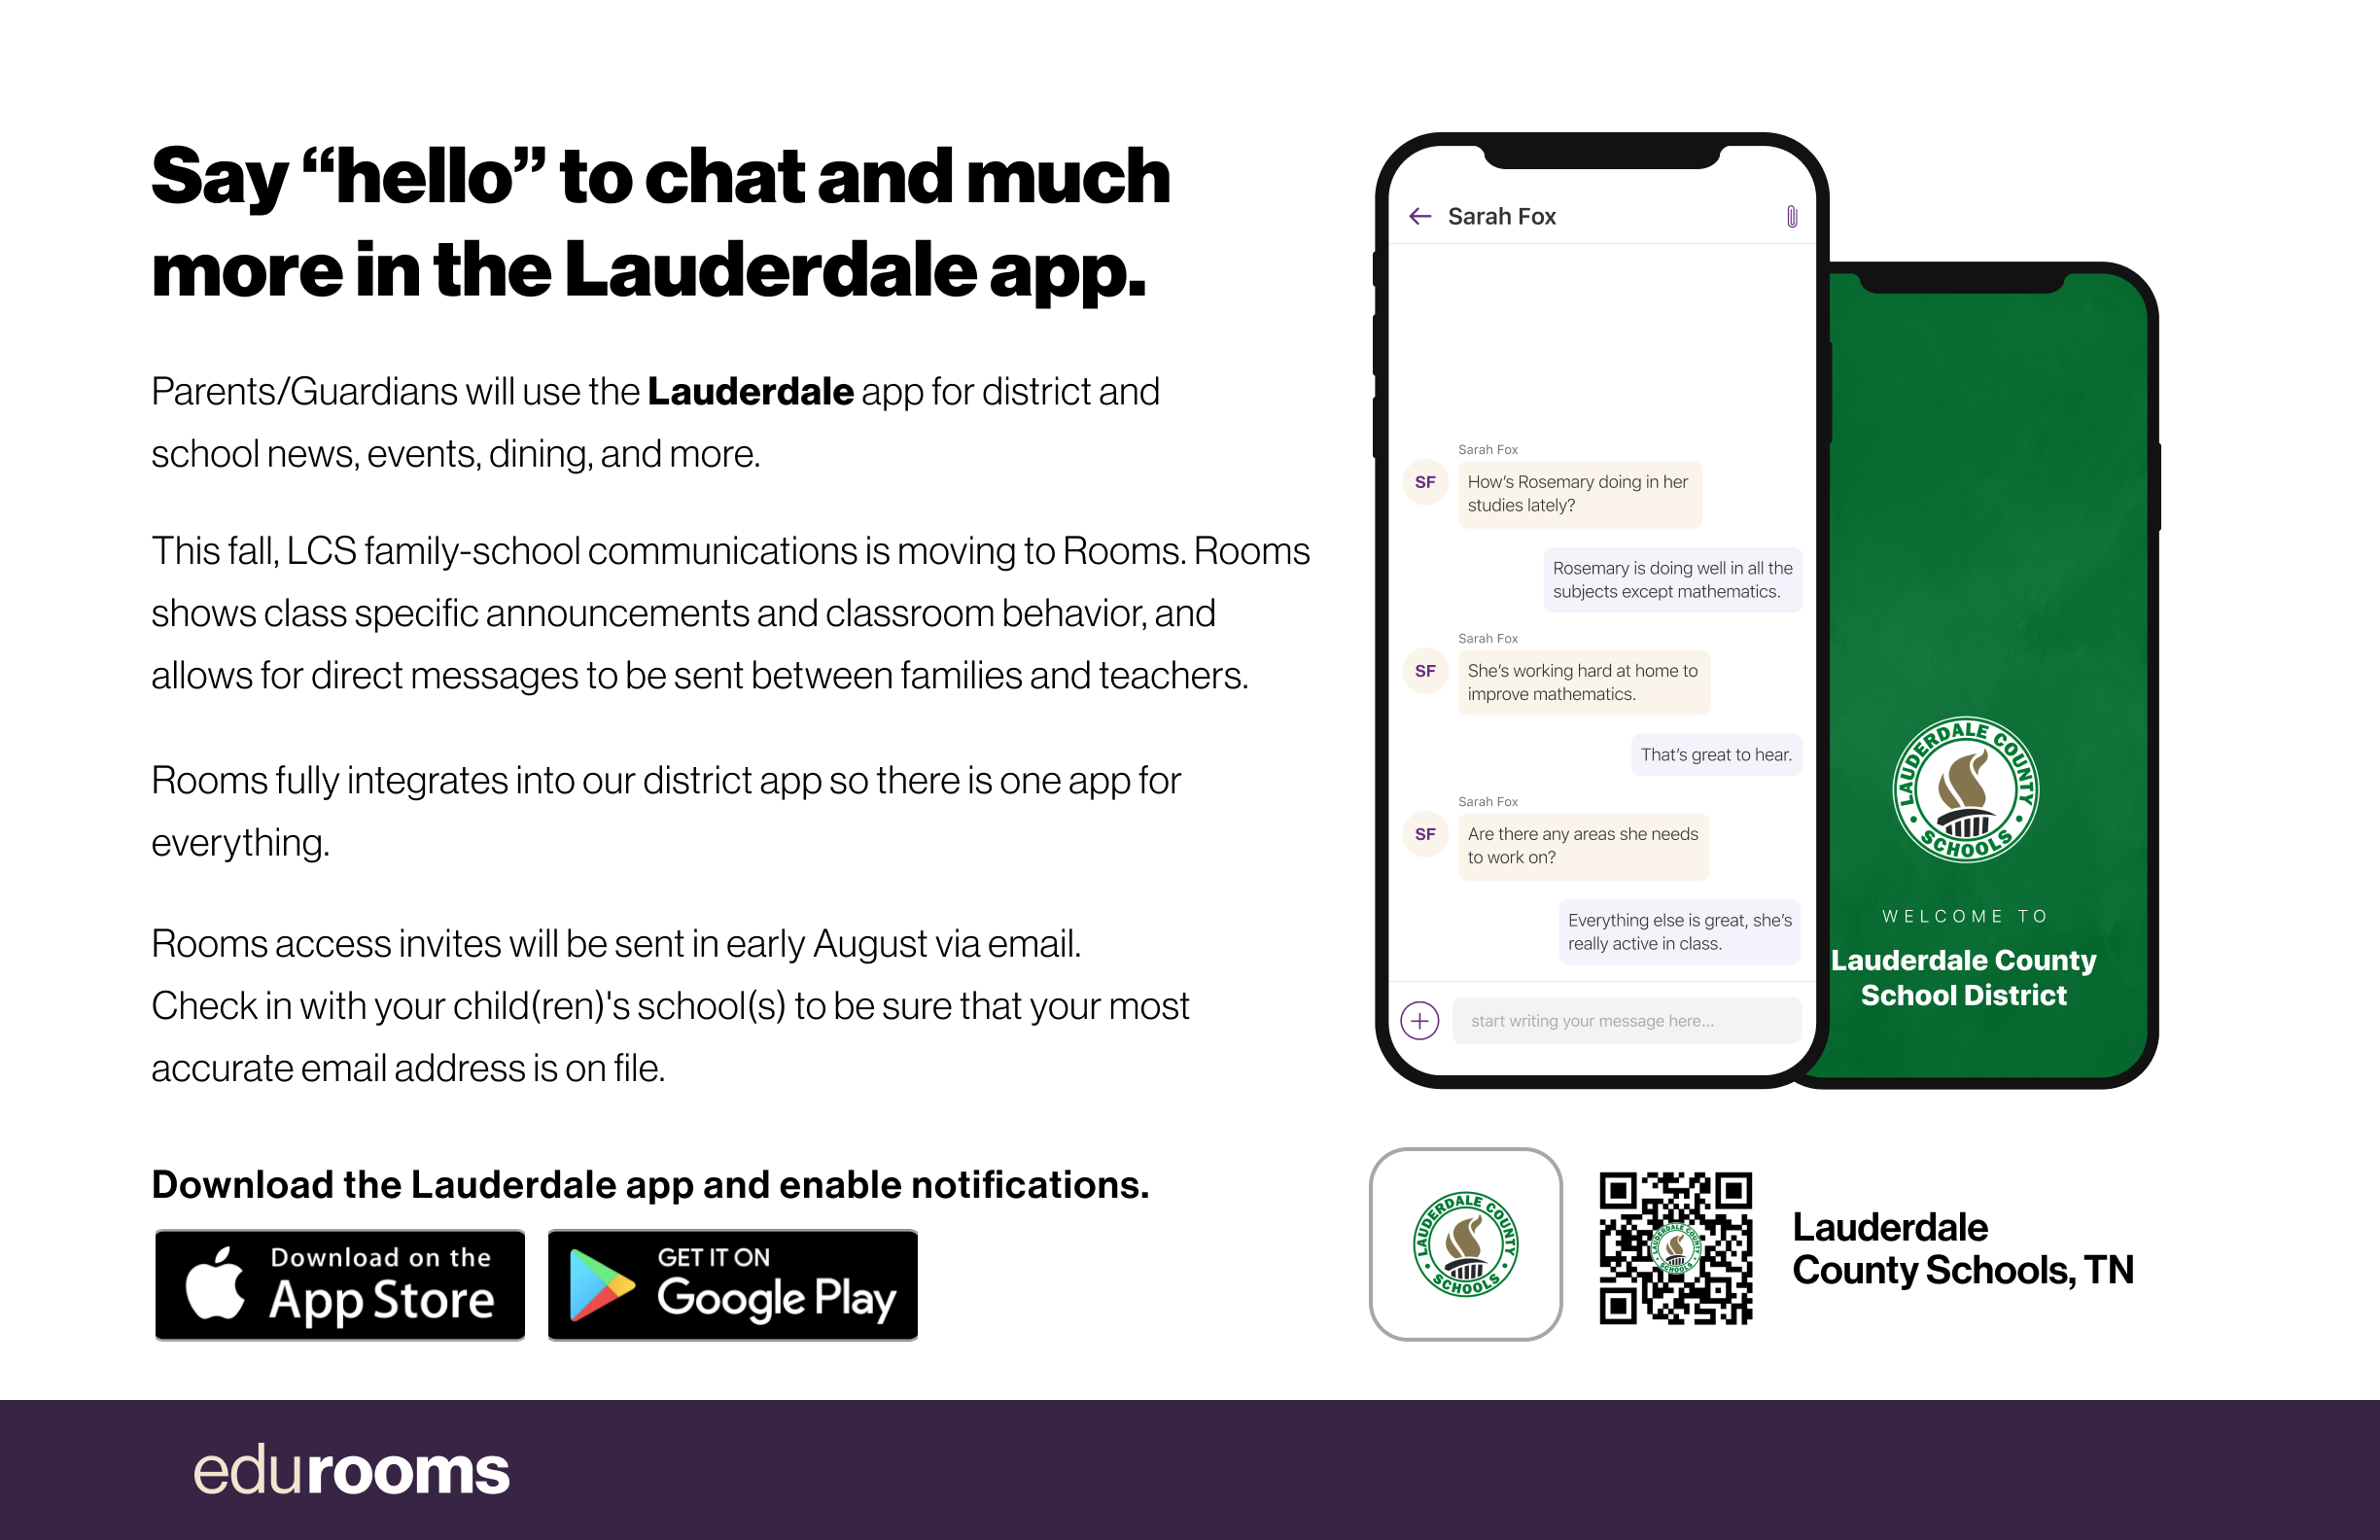 Say "hello" to chat and much more in the Lauderdale app. Parents/Guardians will use the Lauderdale app for district and school news, events, dining, and more. This fall, LCS family-school communications is moving to Rooms. Rooms shows class specific announcements and classroom behavior, and allows for direct messages to be sent between families and teachers. Rooms fully integrates into our district app so there is one app for everything. Rooms access invites will be sent in early August via email. Check in with your child(ren)'s school(s) to be sure that your most accurate email address is on file. Download the Lauderdale app and enable notifications.